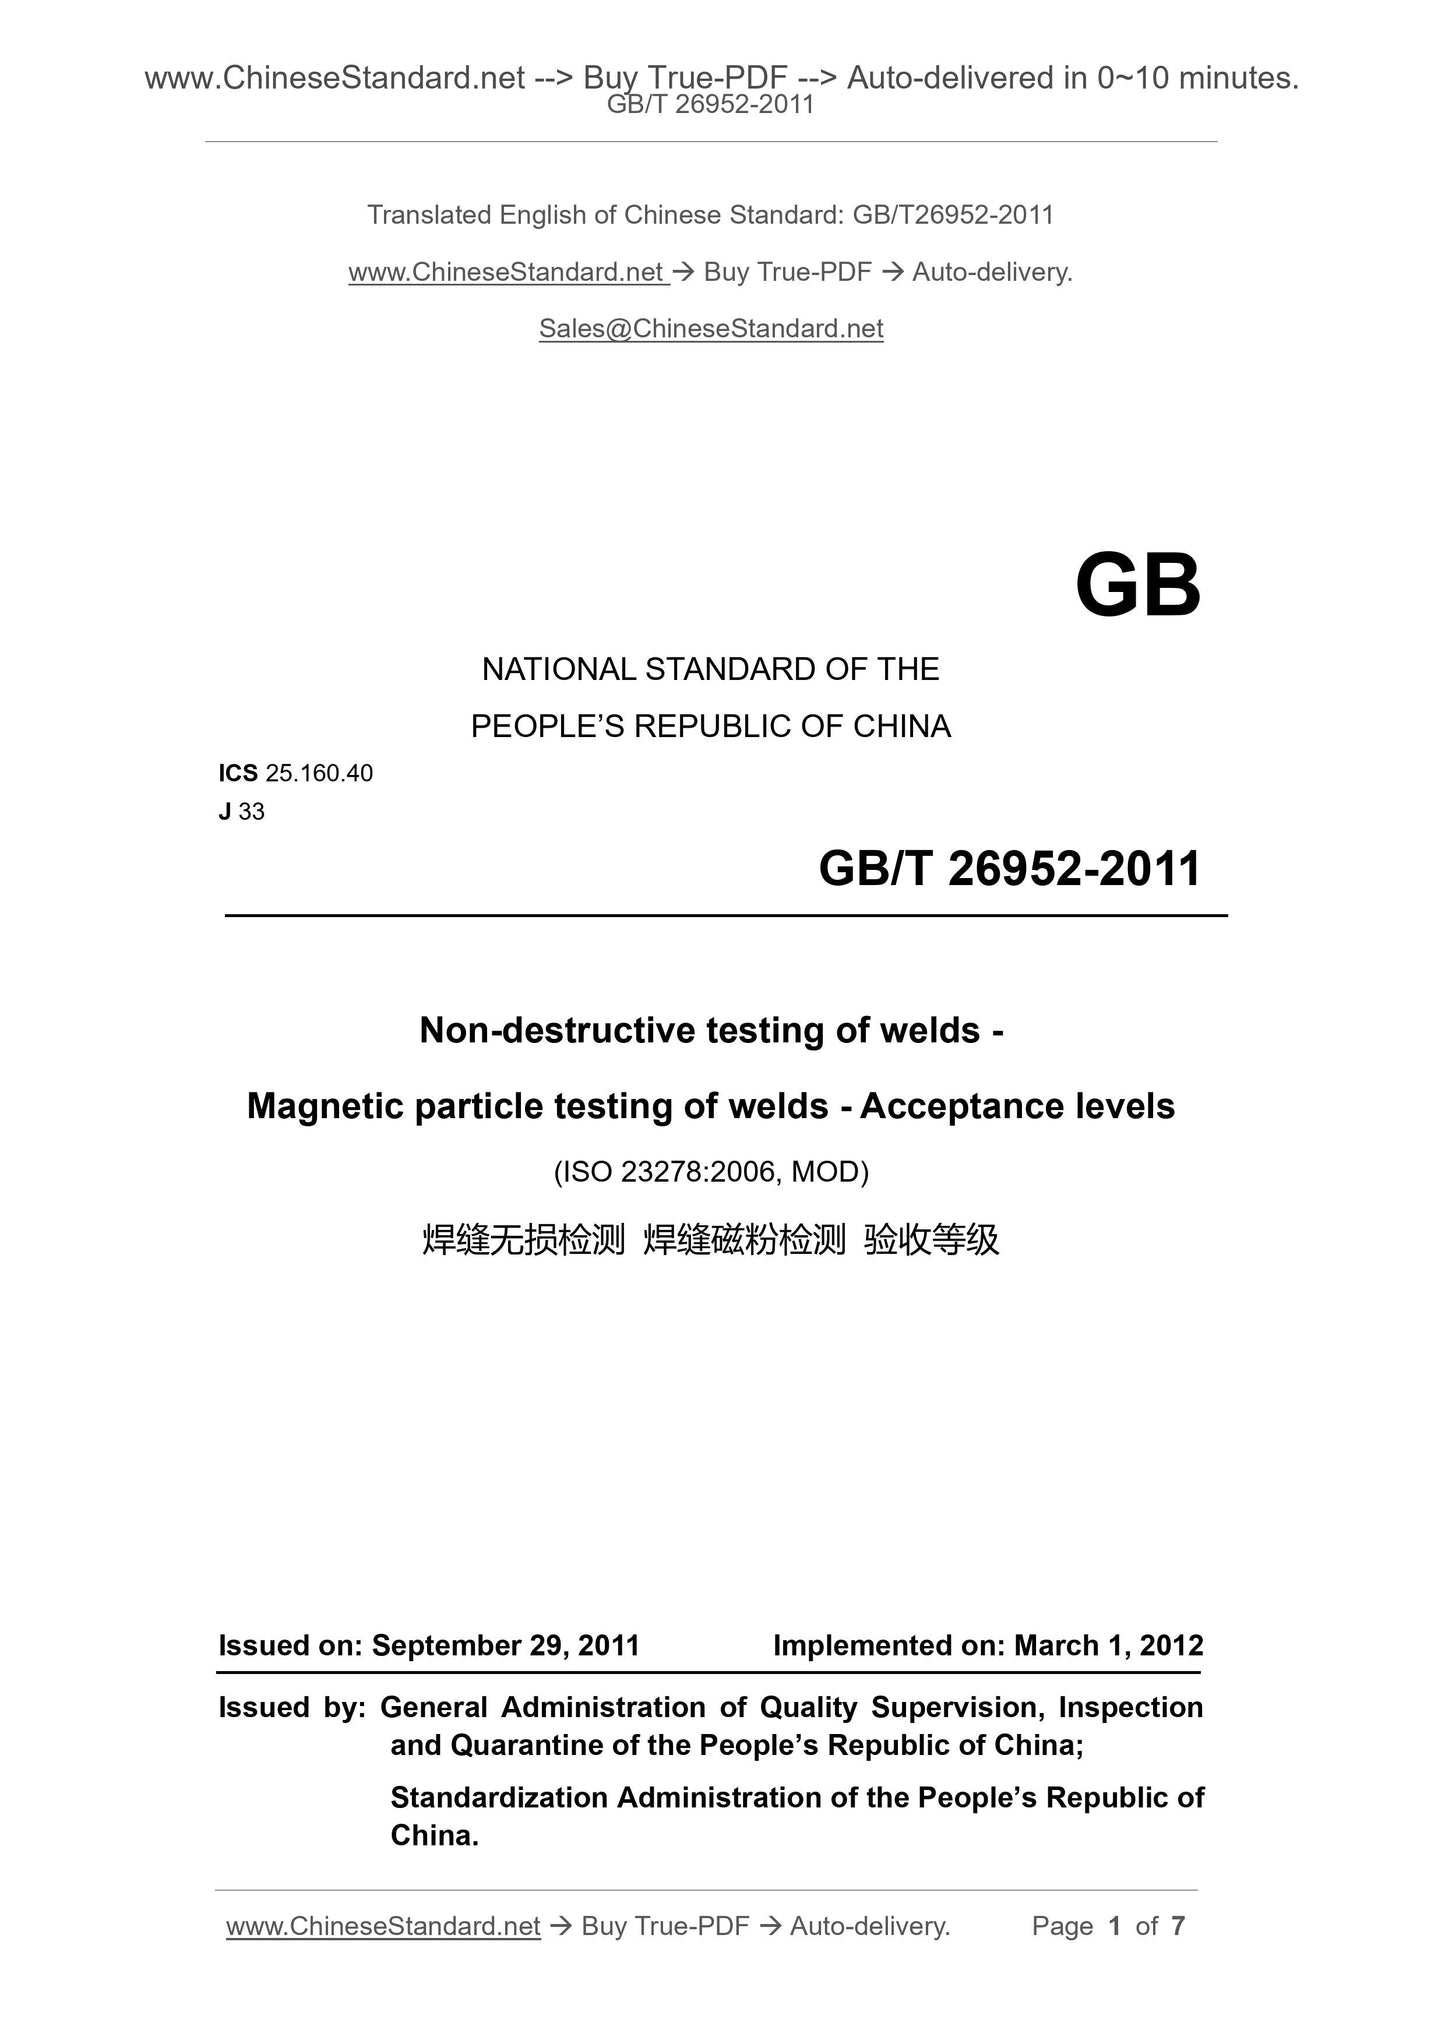 GB/T 26952-2011 Page 1